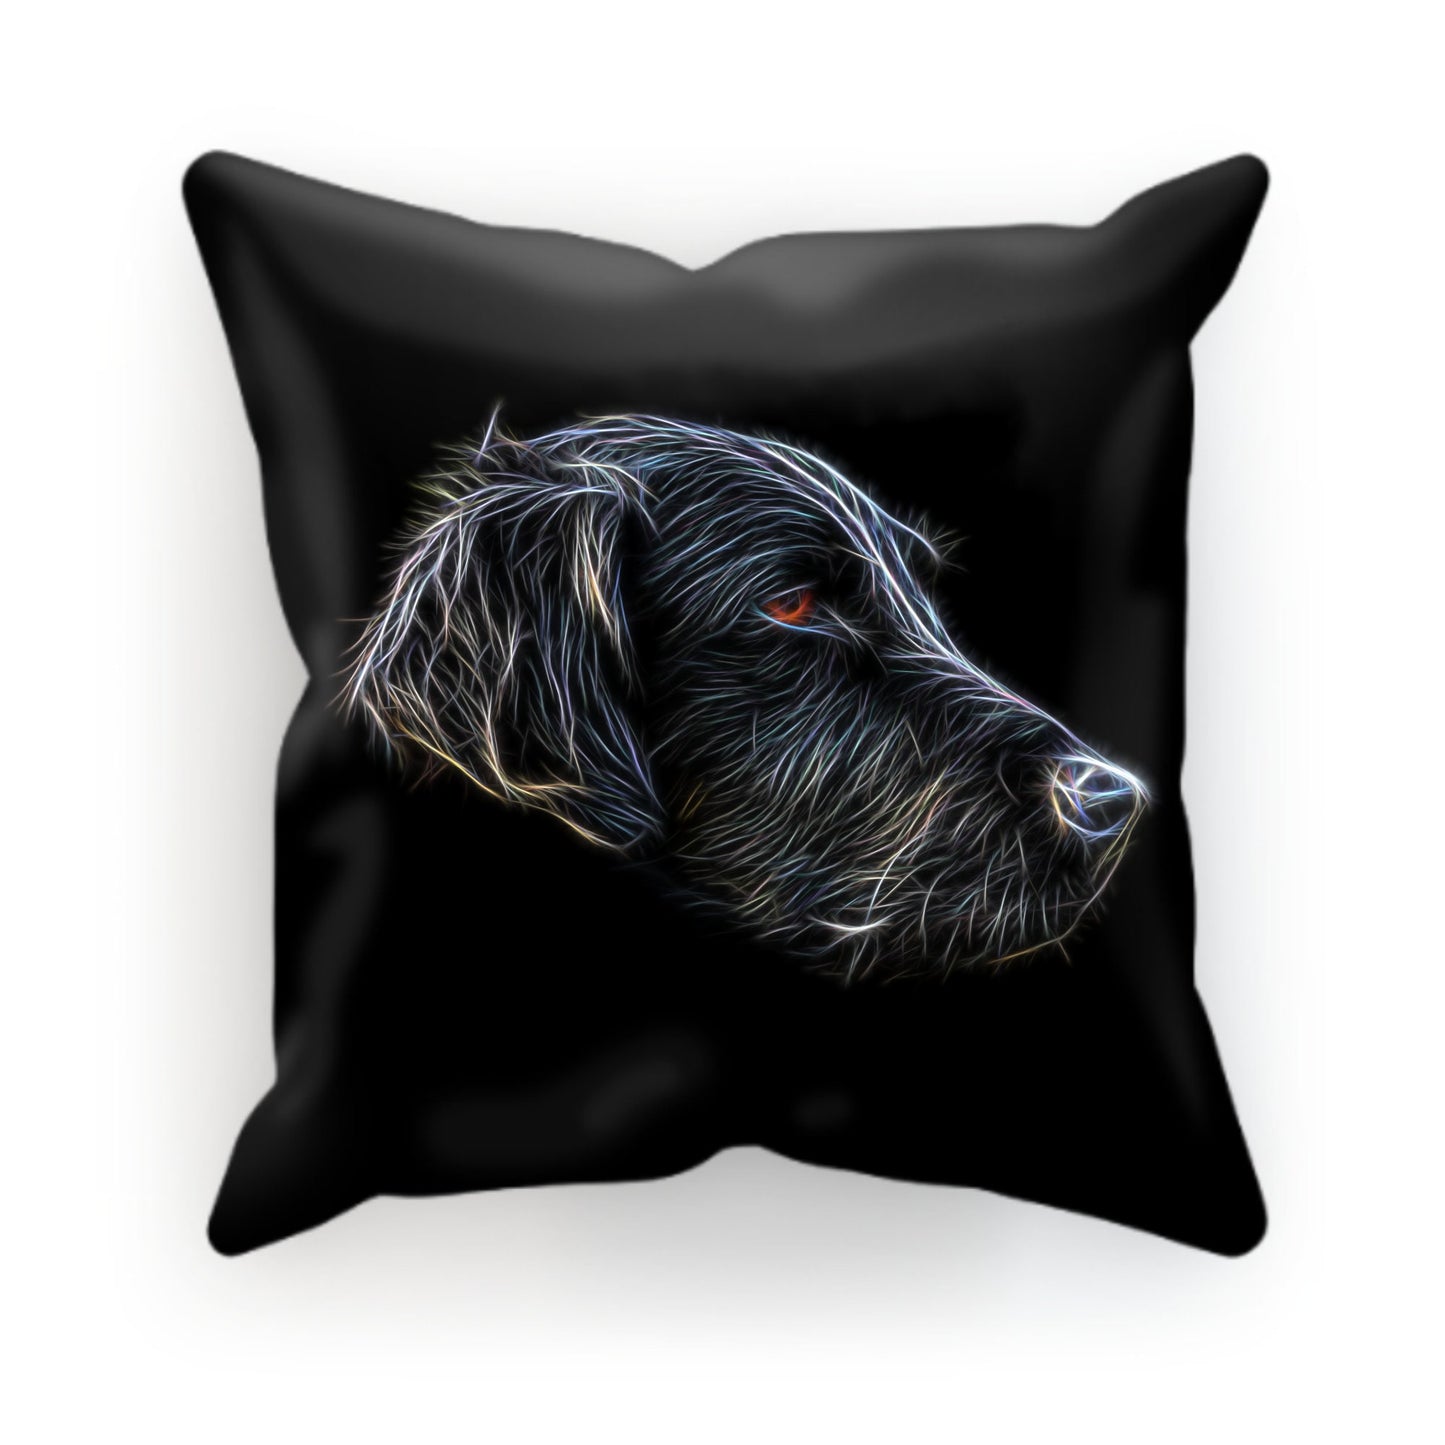 Flat Coated Retriever Cushion and Insert with Stunning Fractal Art Design